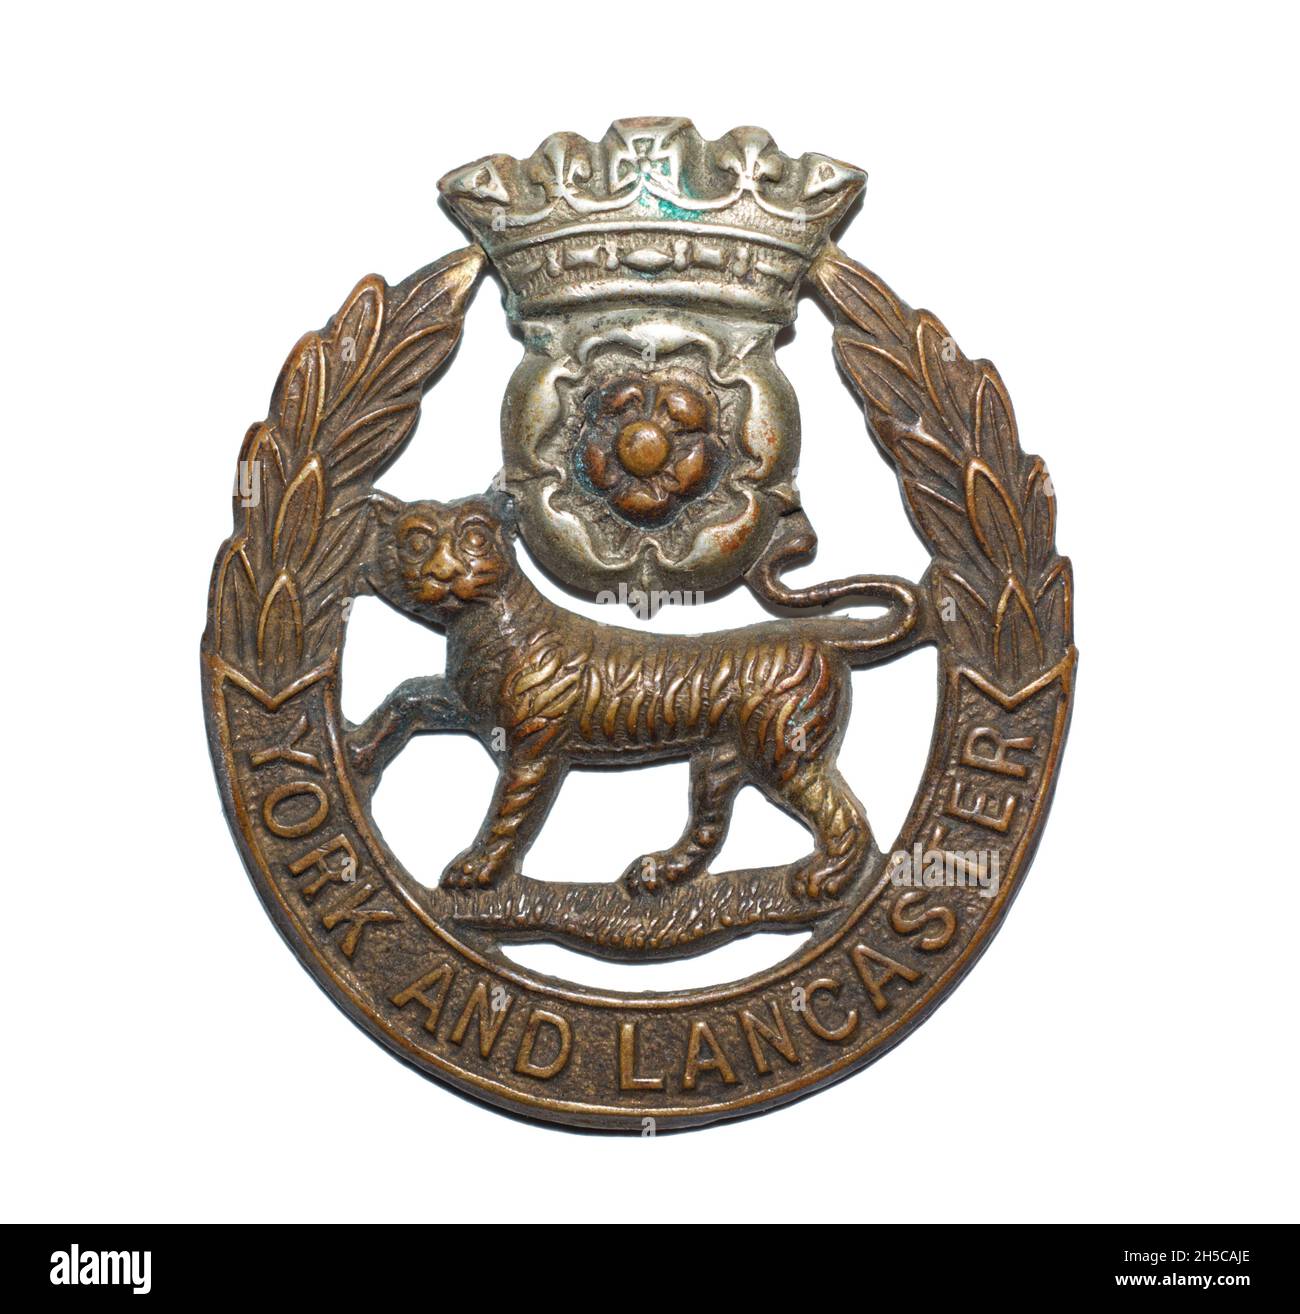 The cap badge of York and Lancaster Regiment as issues through both the First World War and Second World War up until 1968. Stock Photo